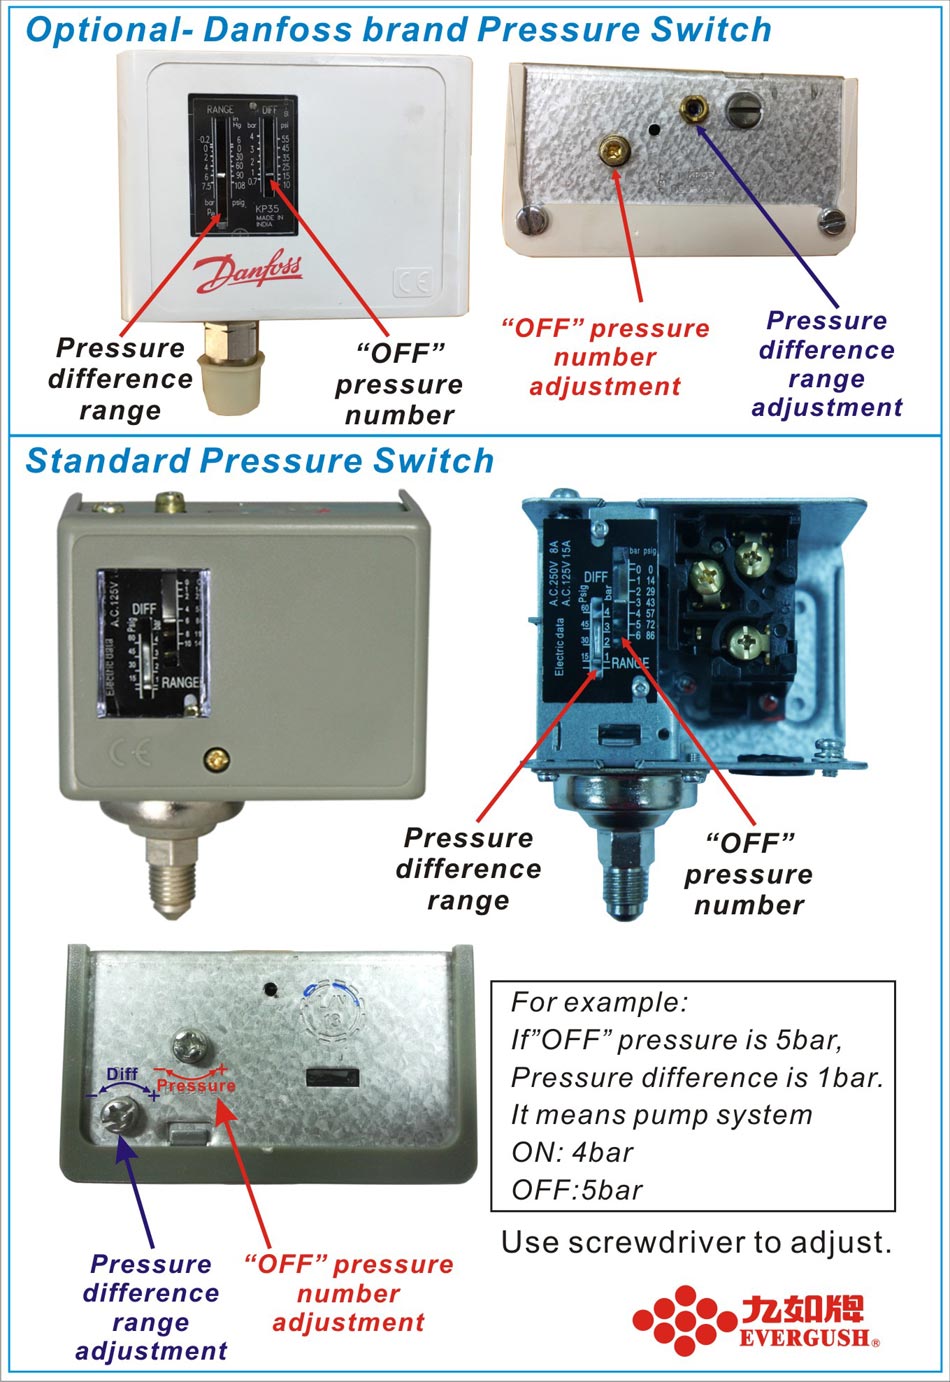 How to adjust EVERGUSH Pressure Switch